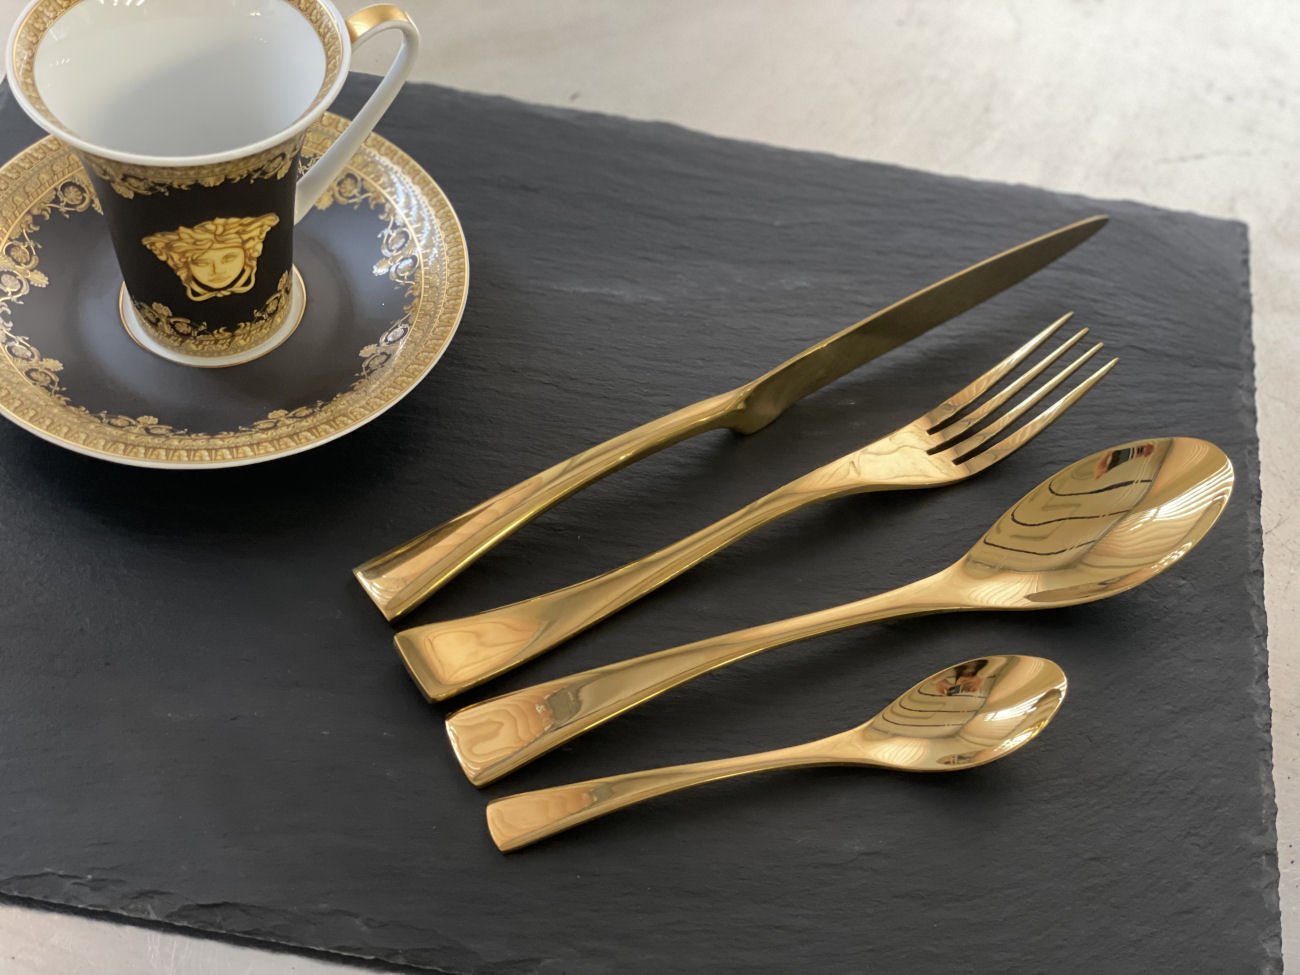 4 Sets of Luxury Gold Stainless Steel Design Cutlery - |VESIMI Design| Luxury and Rustic bathrooms online